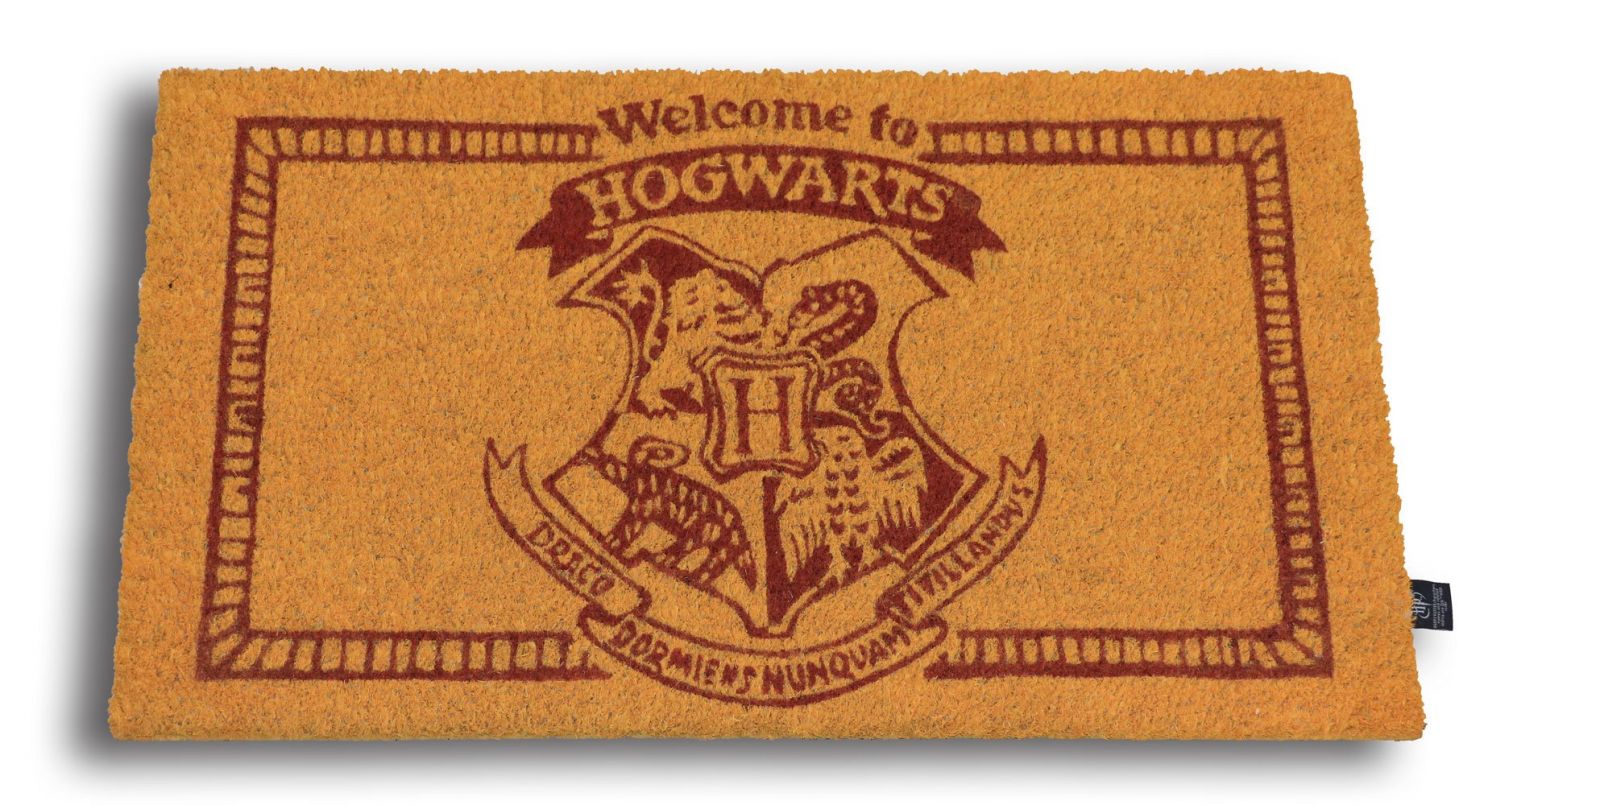 Harry Potter Doormat Welcome To Hogwarts 43 x 72 cm SD Toys